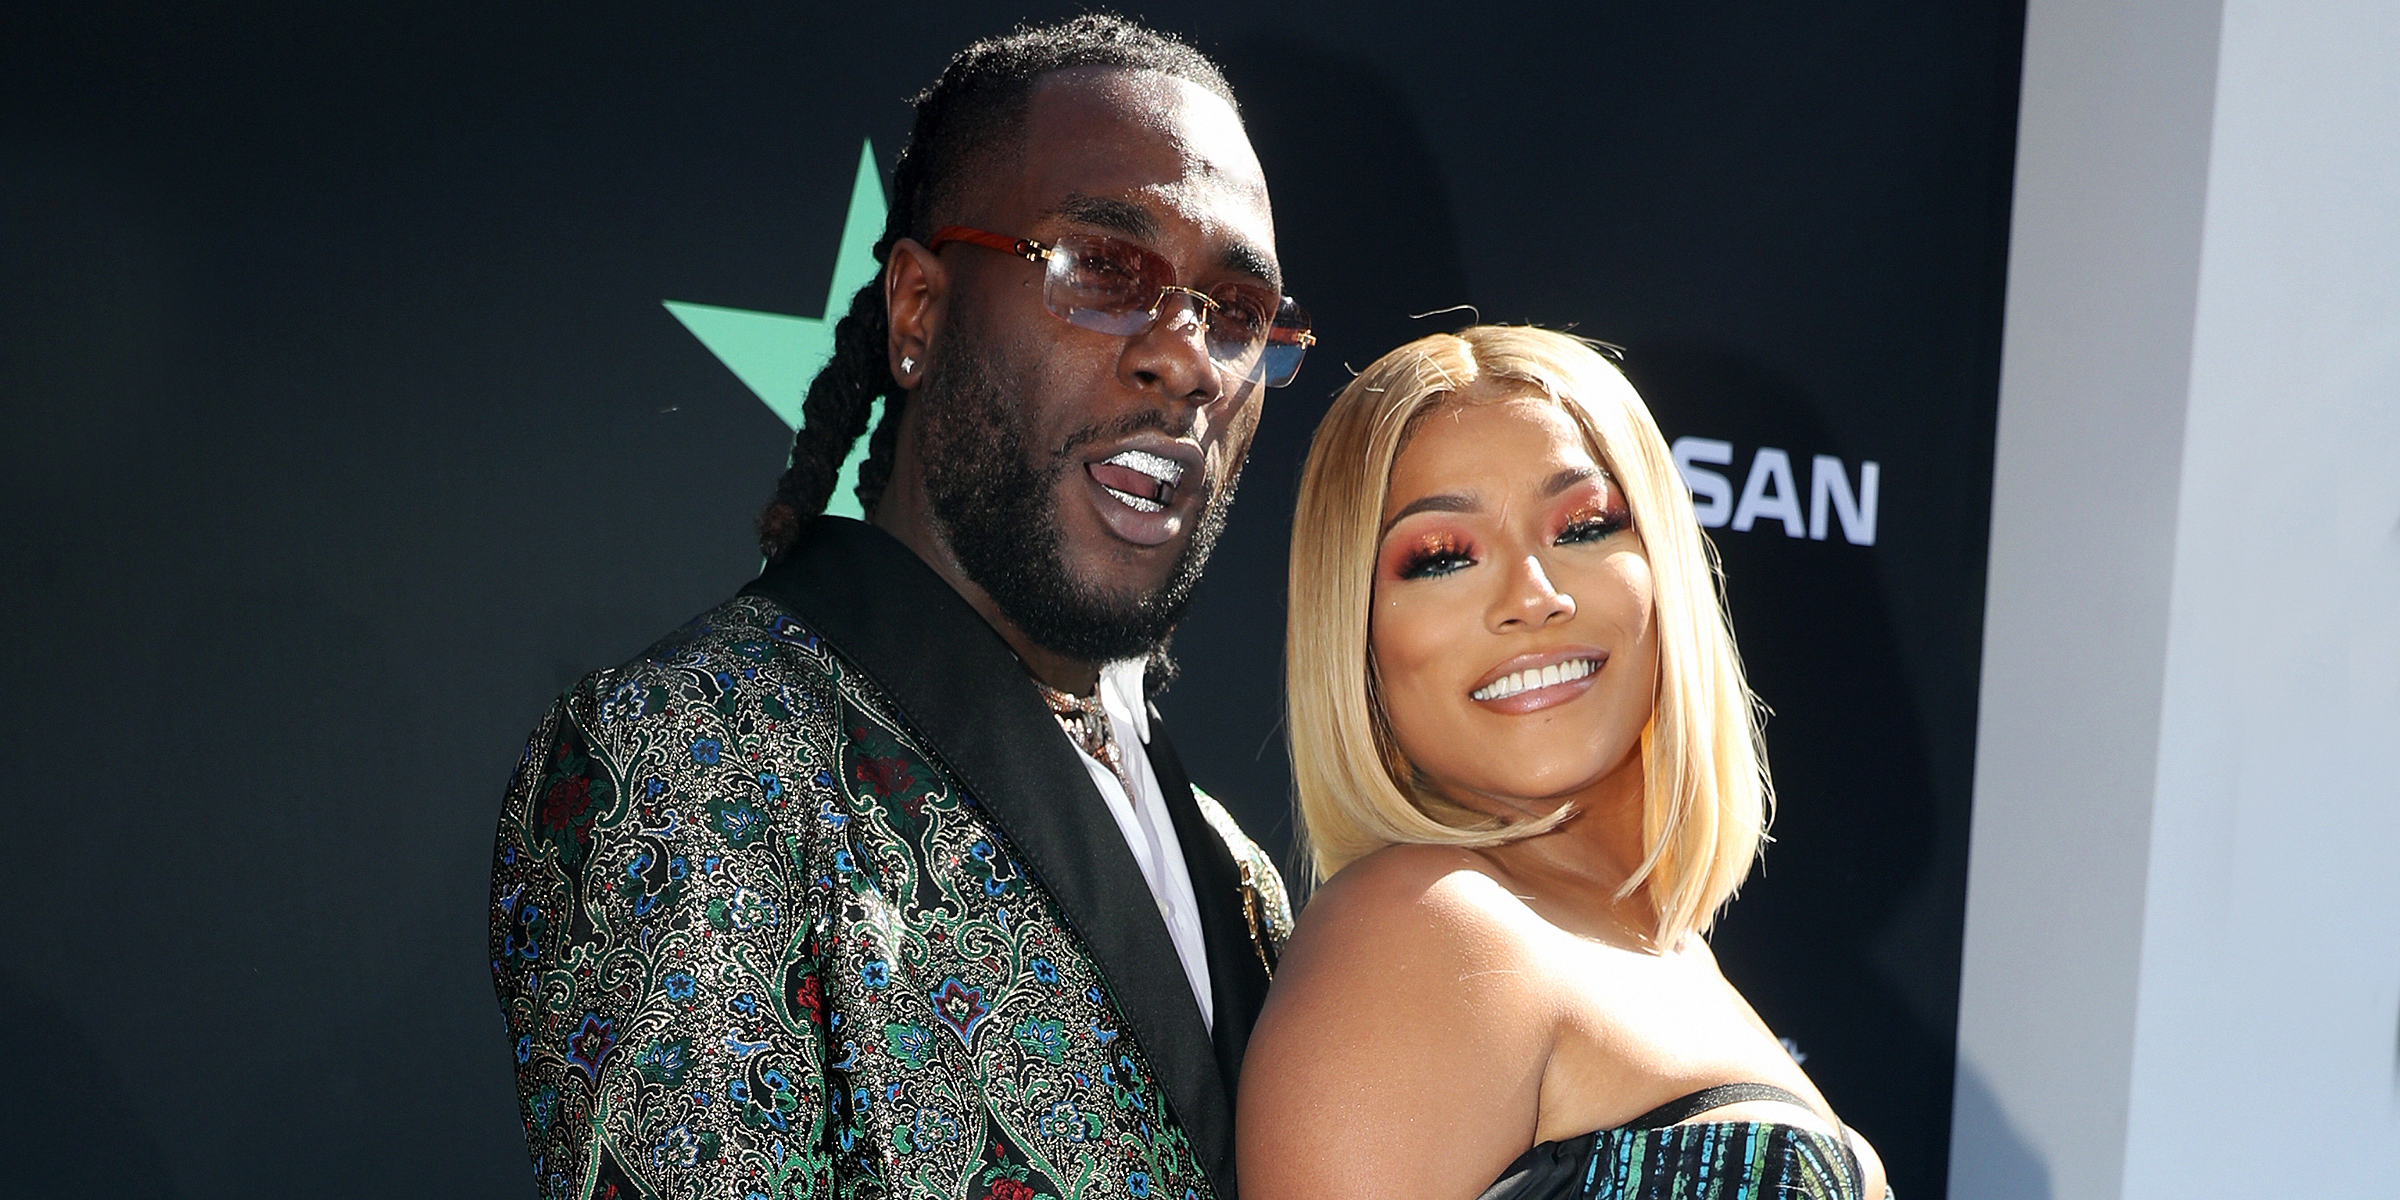 Burna Boy and Stefflon Don | Source: Getty Images